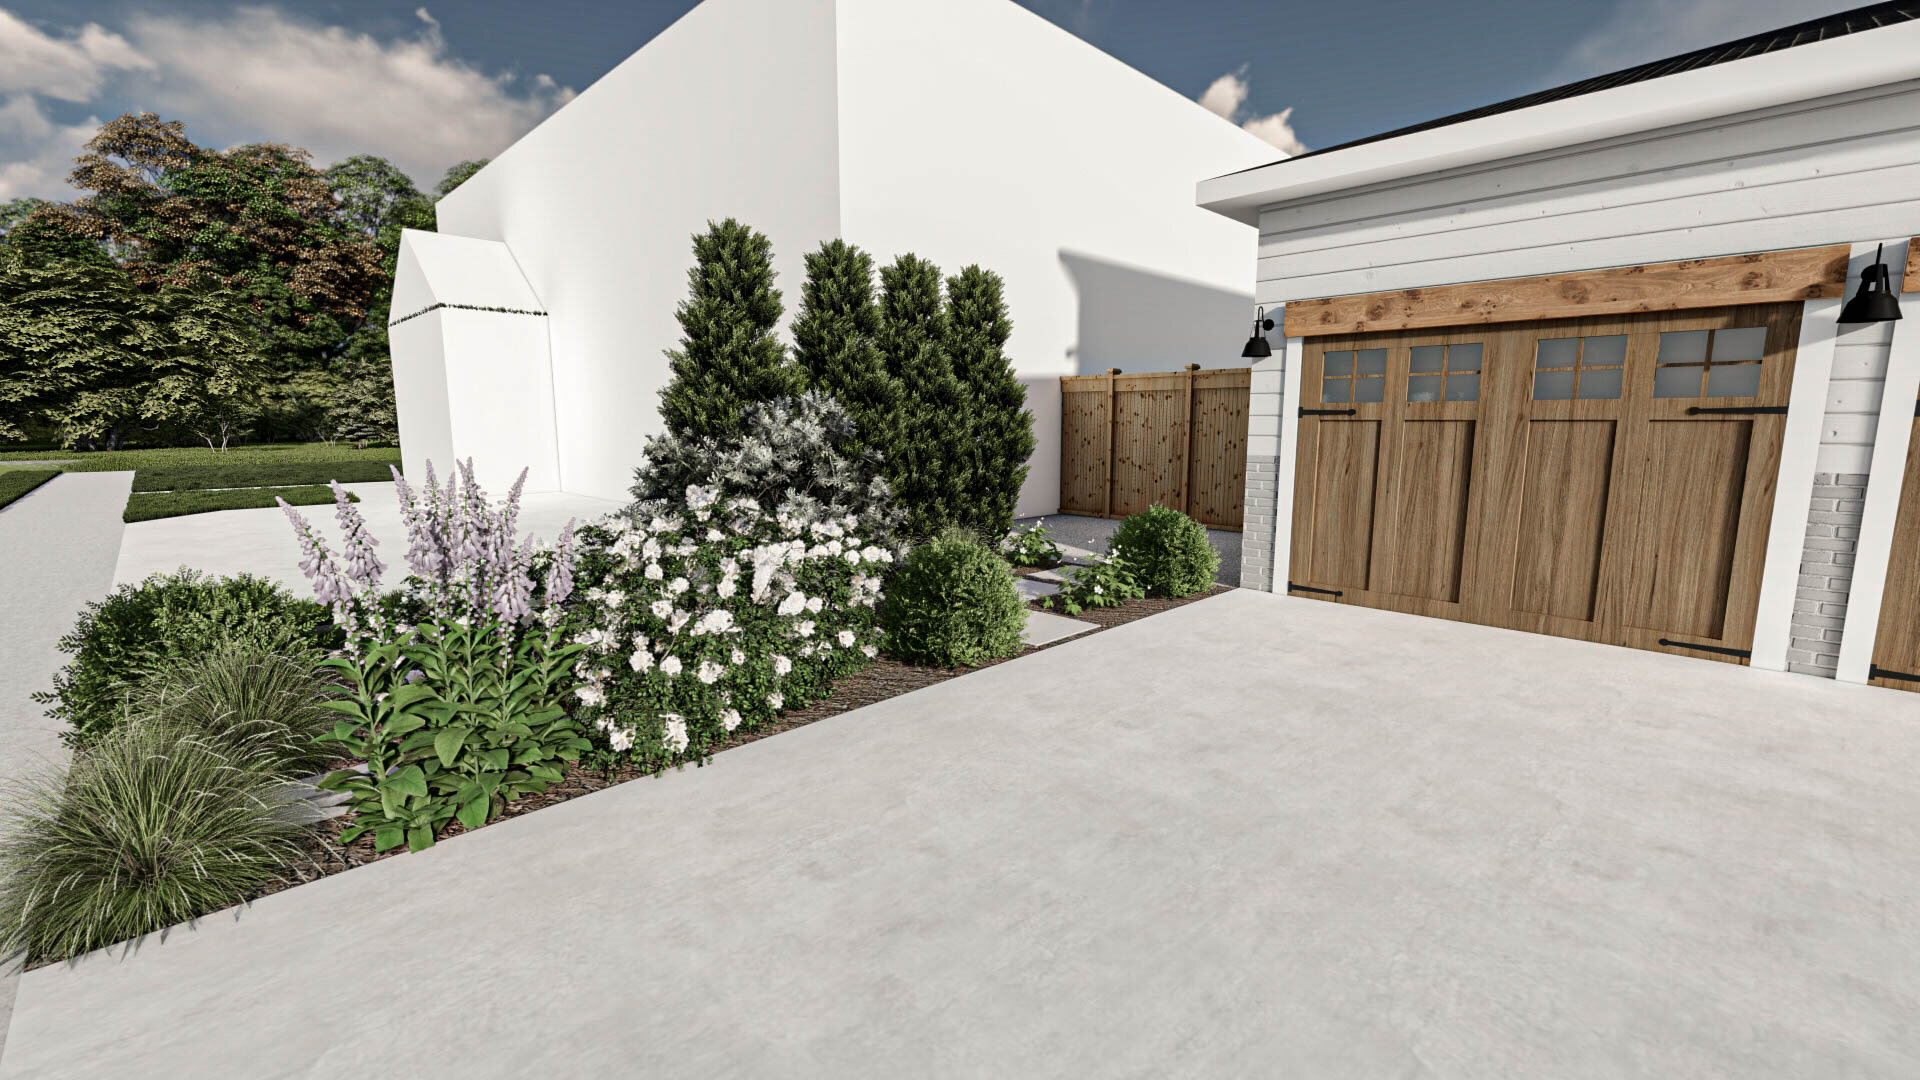 Side yard view of driveway and garage door near lush plantings